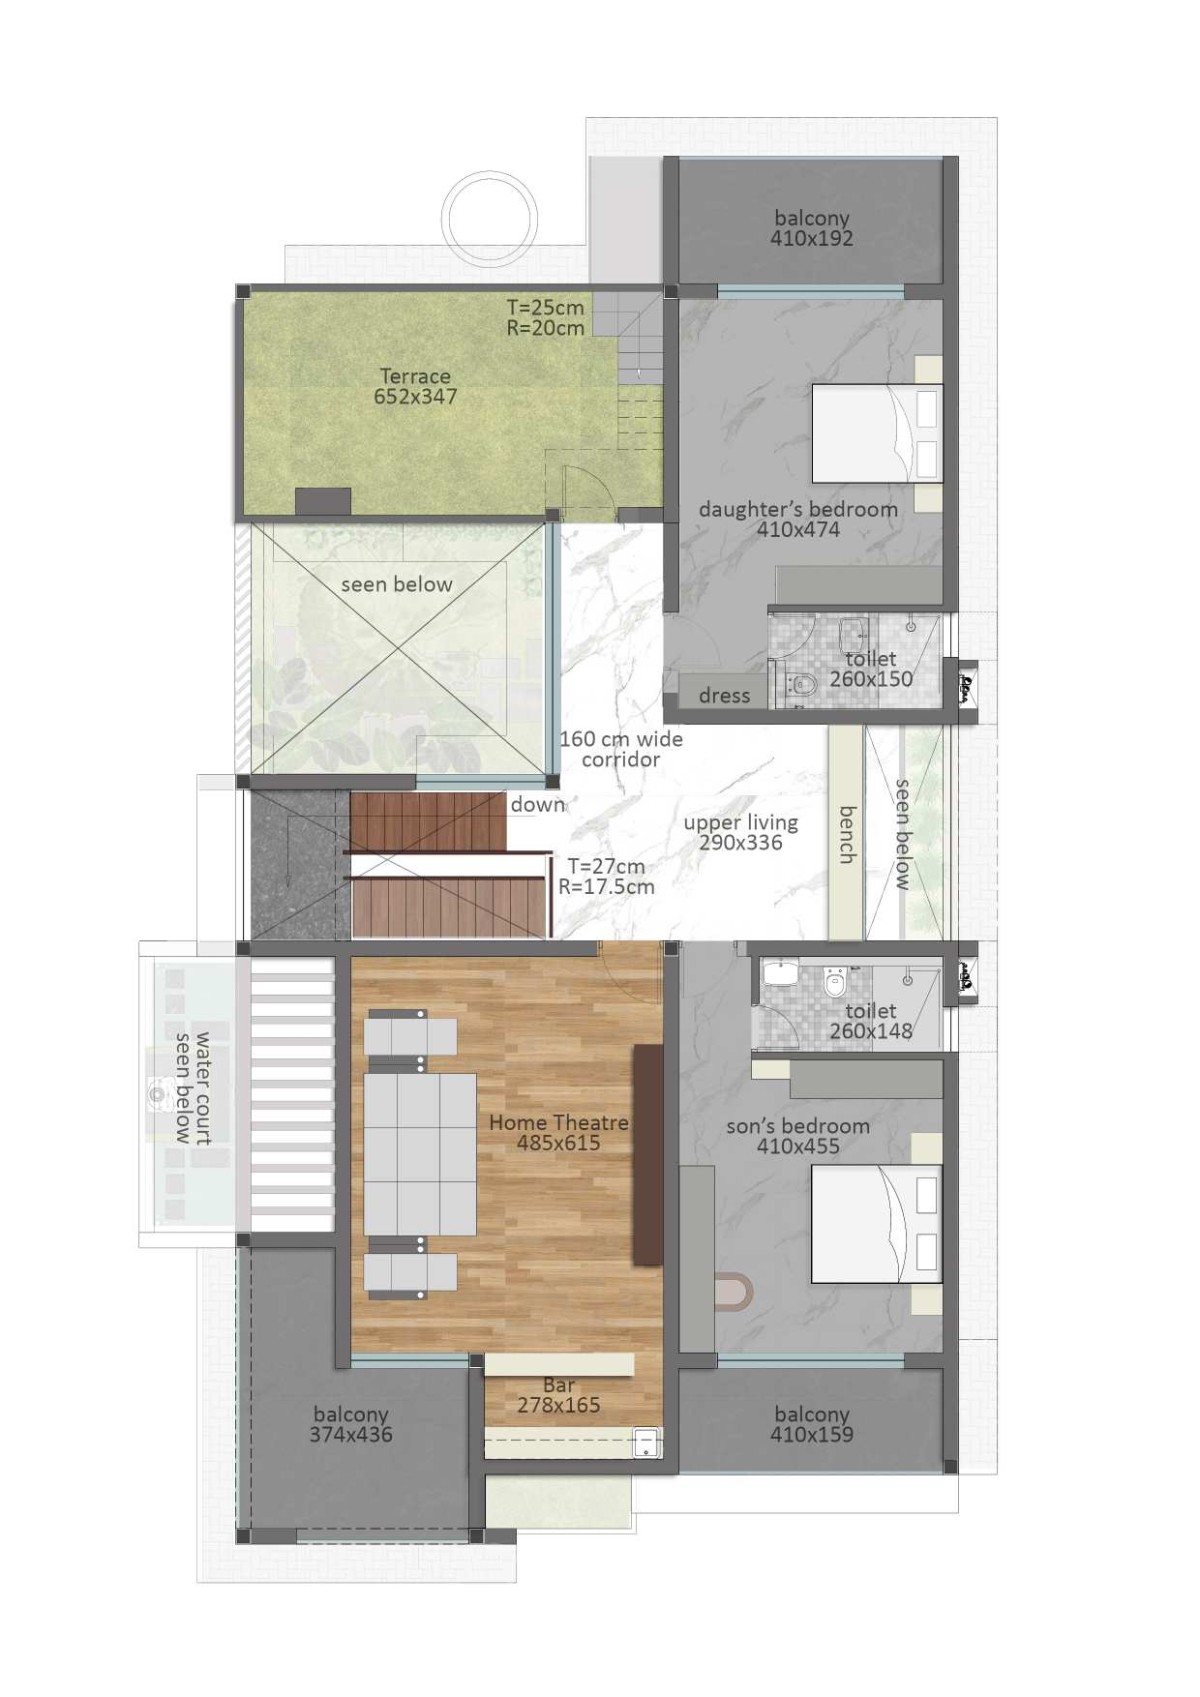 First Floor Plan of The Pravasi Home by Studio Vista Architects